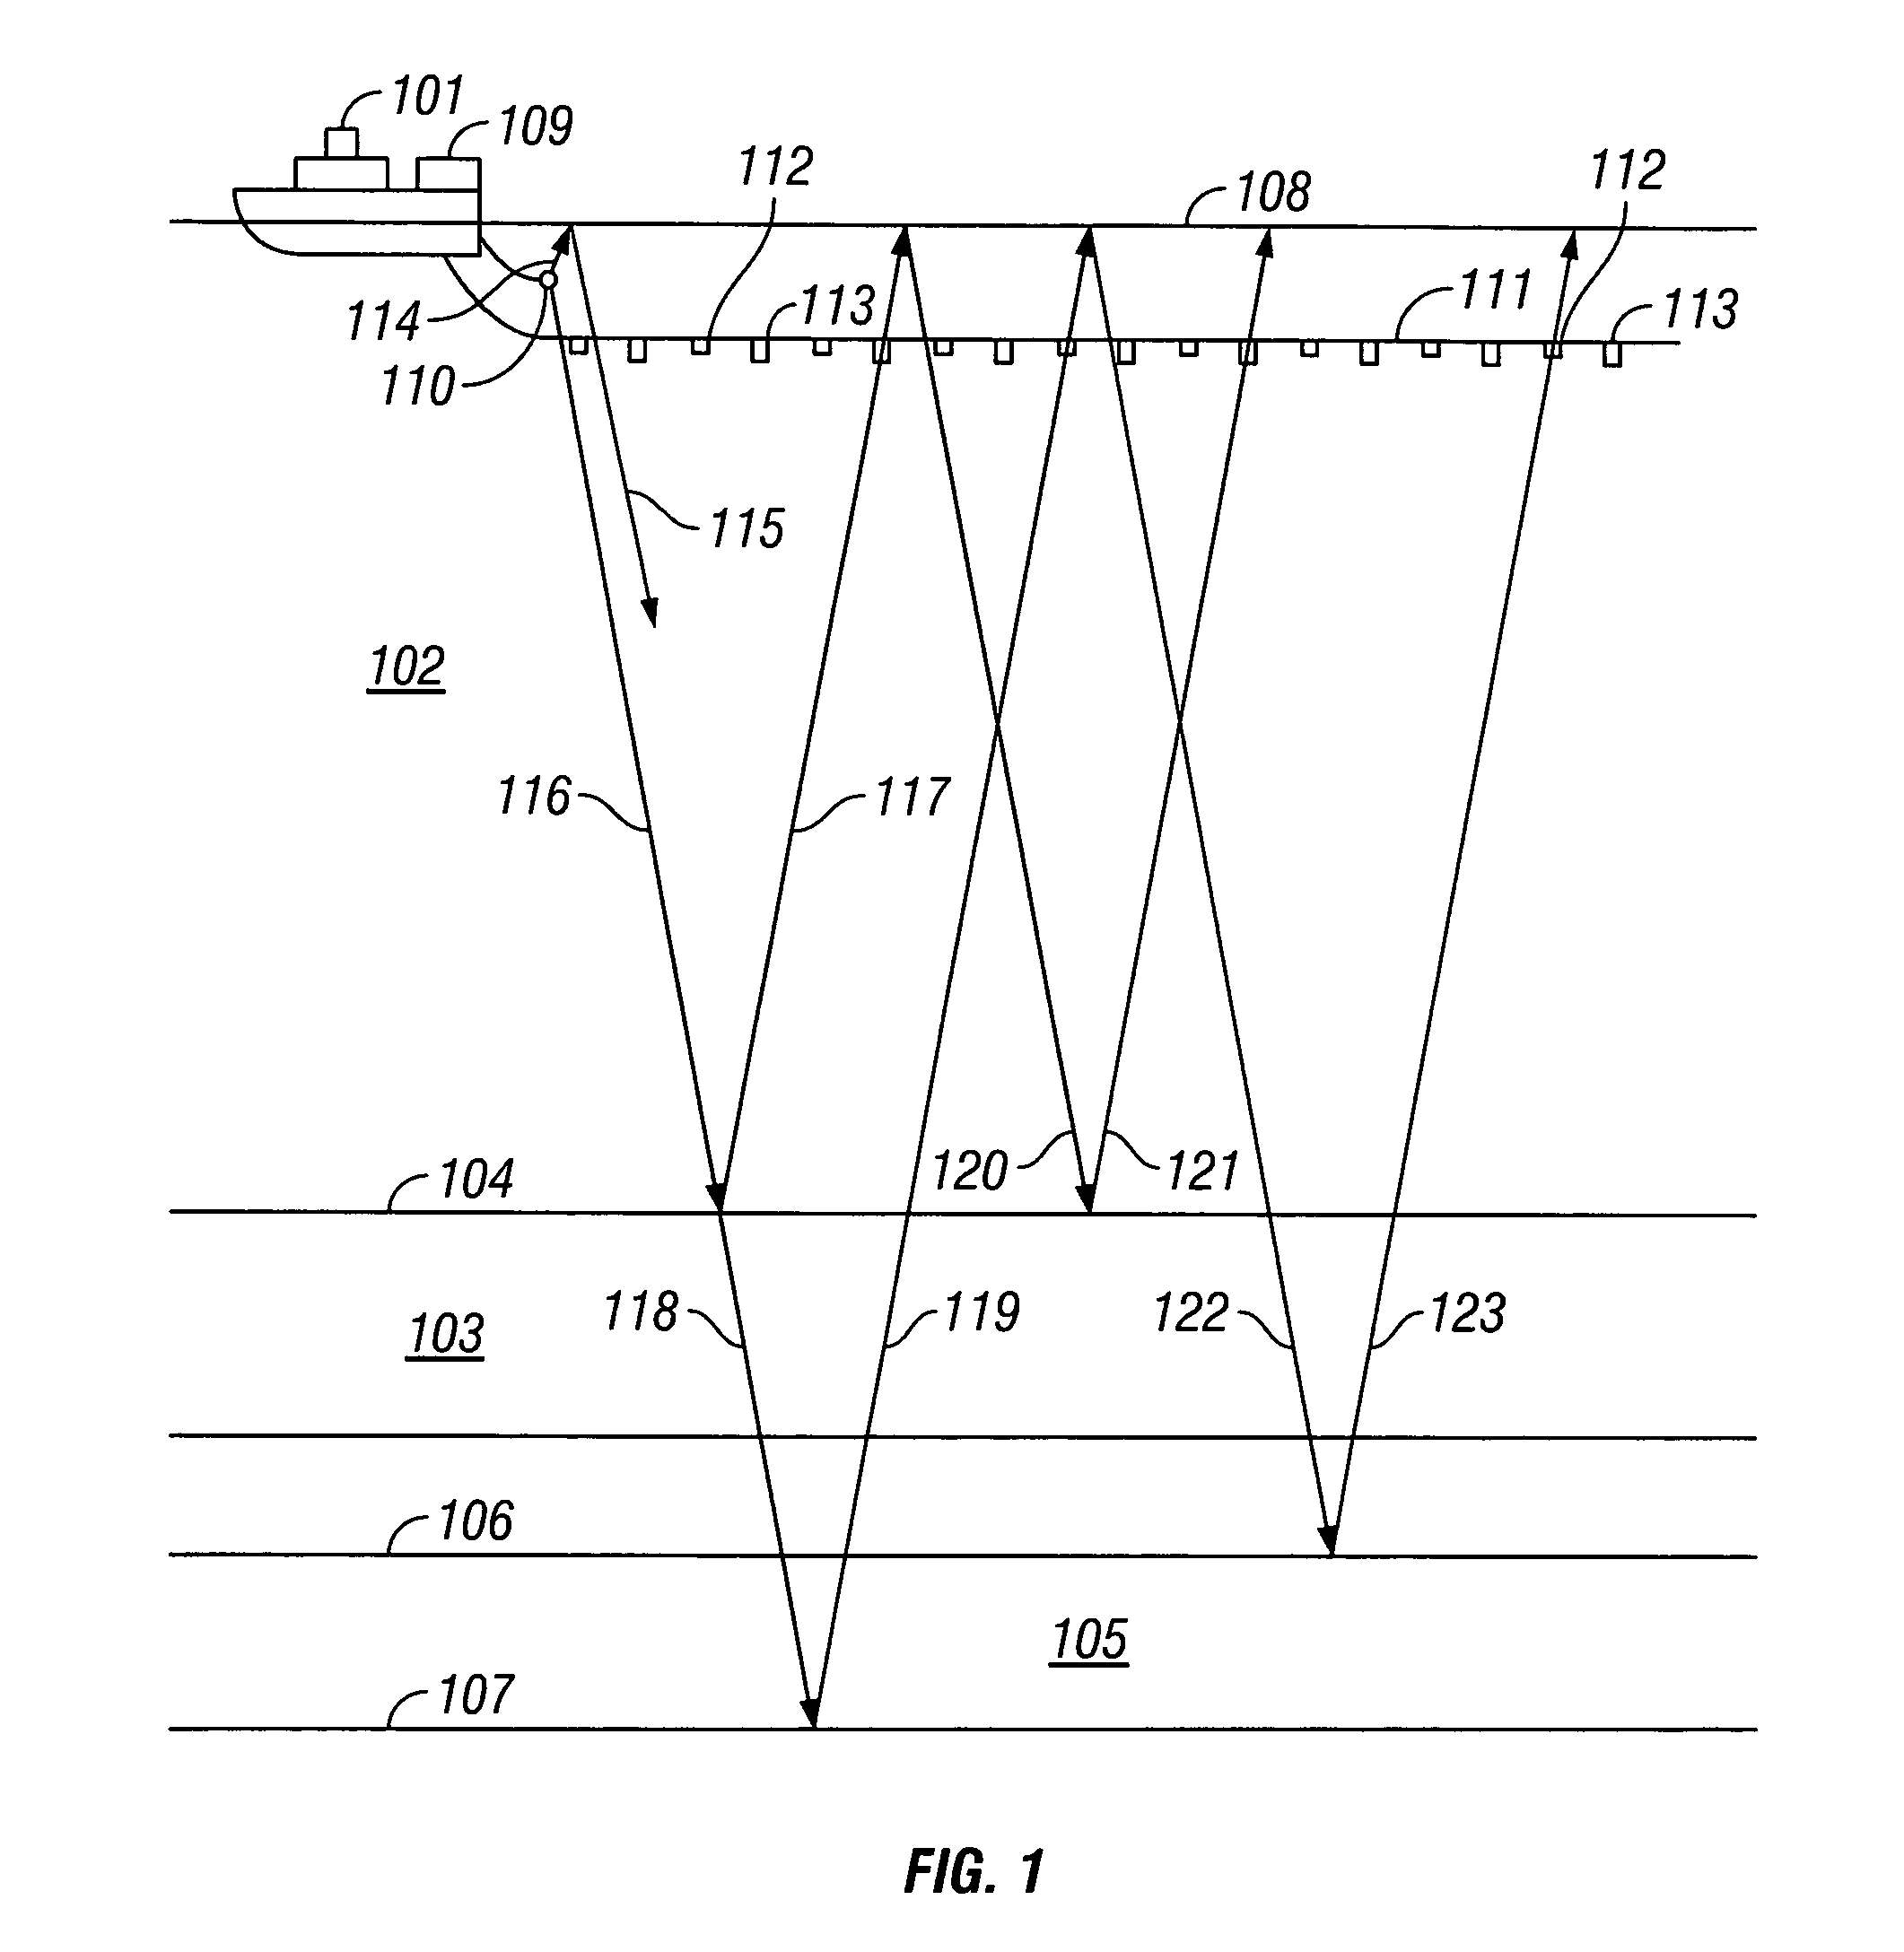 Method for combining pressure and motion seismic signals from streamers where sensors are not at a common depth